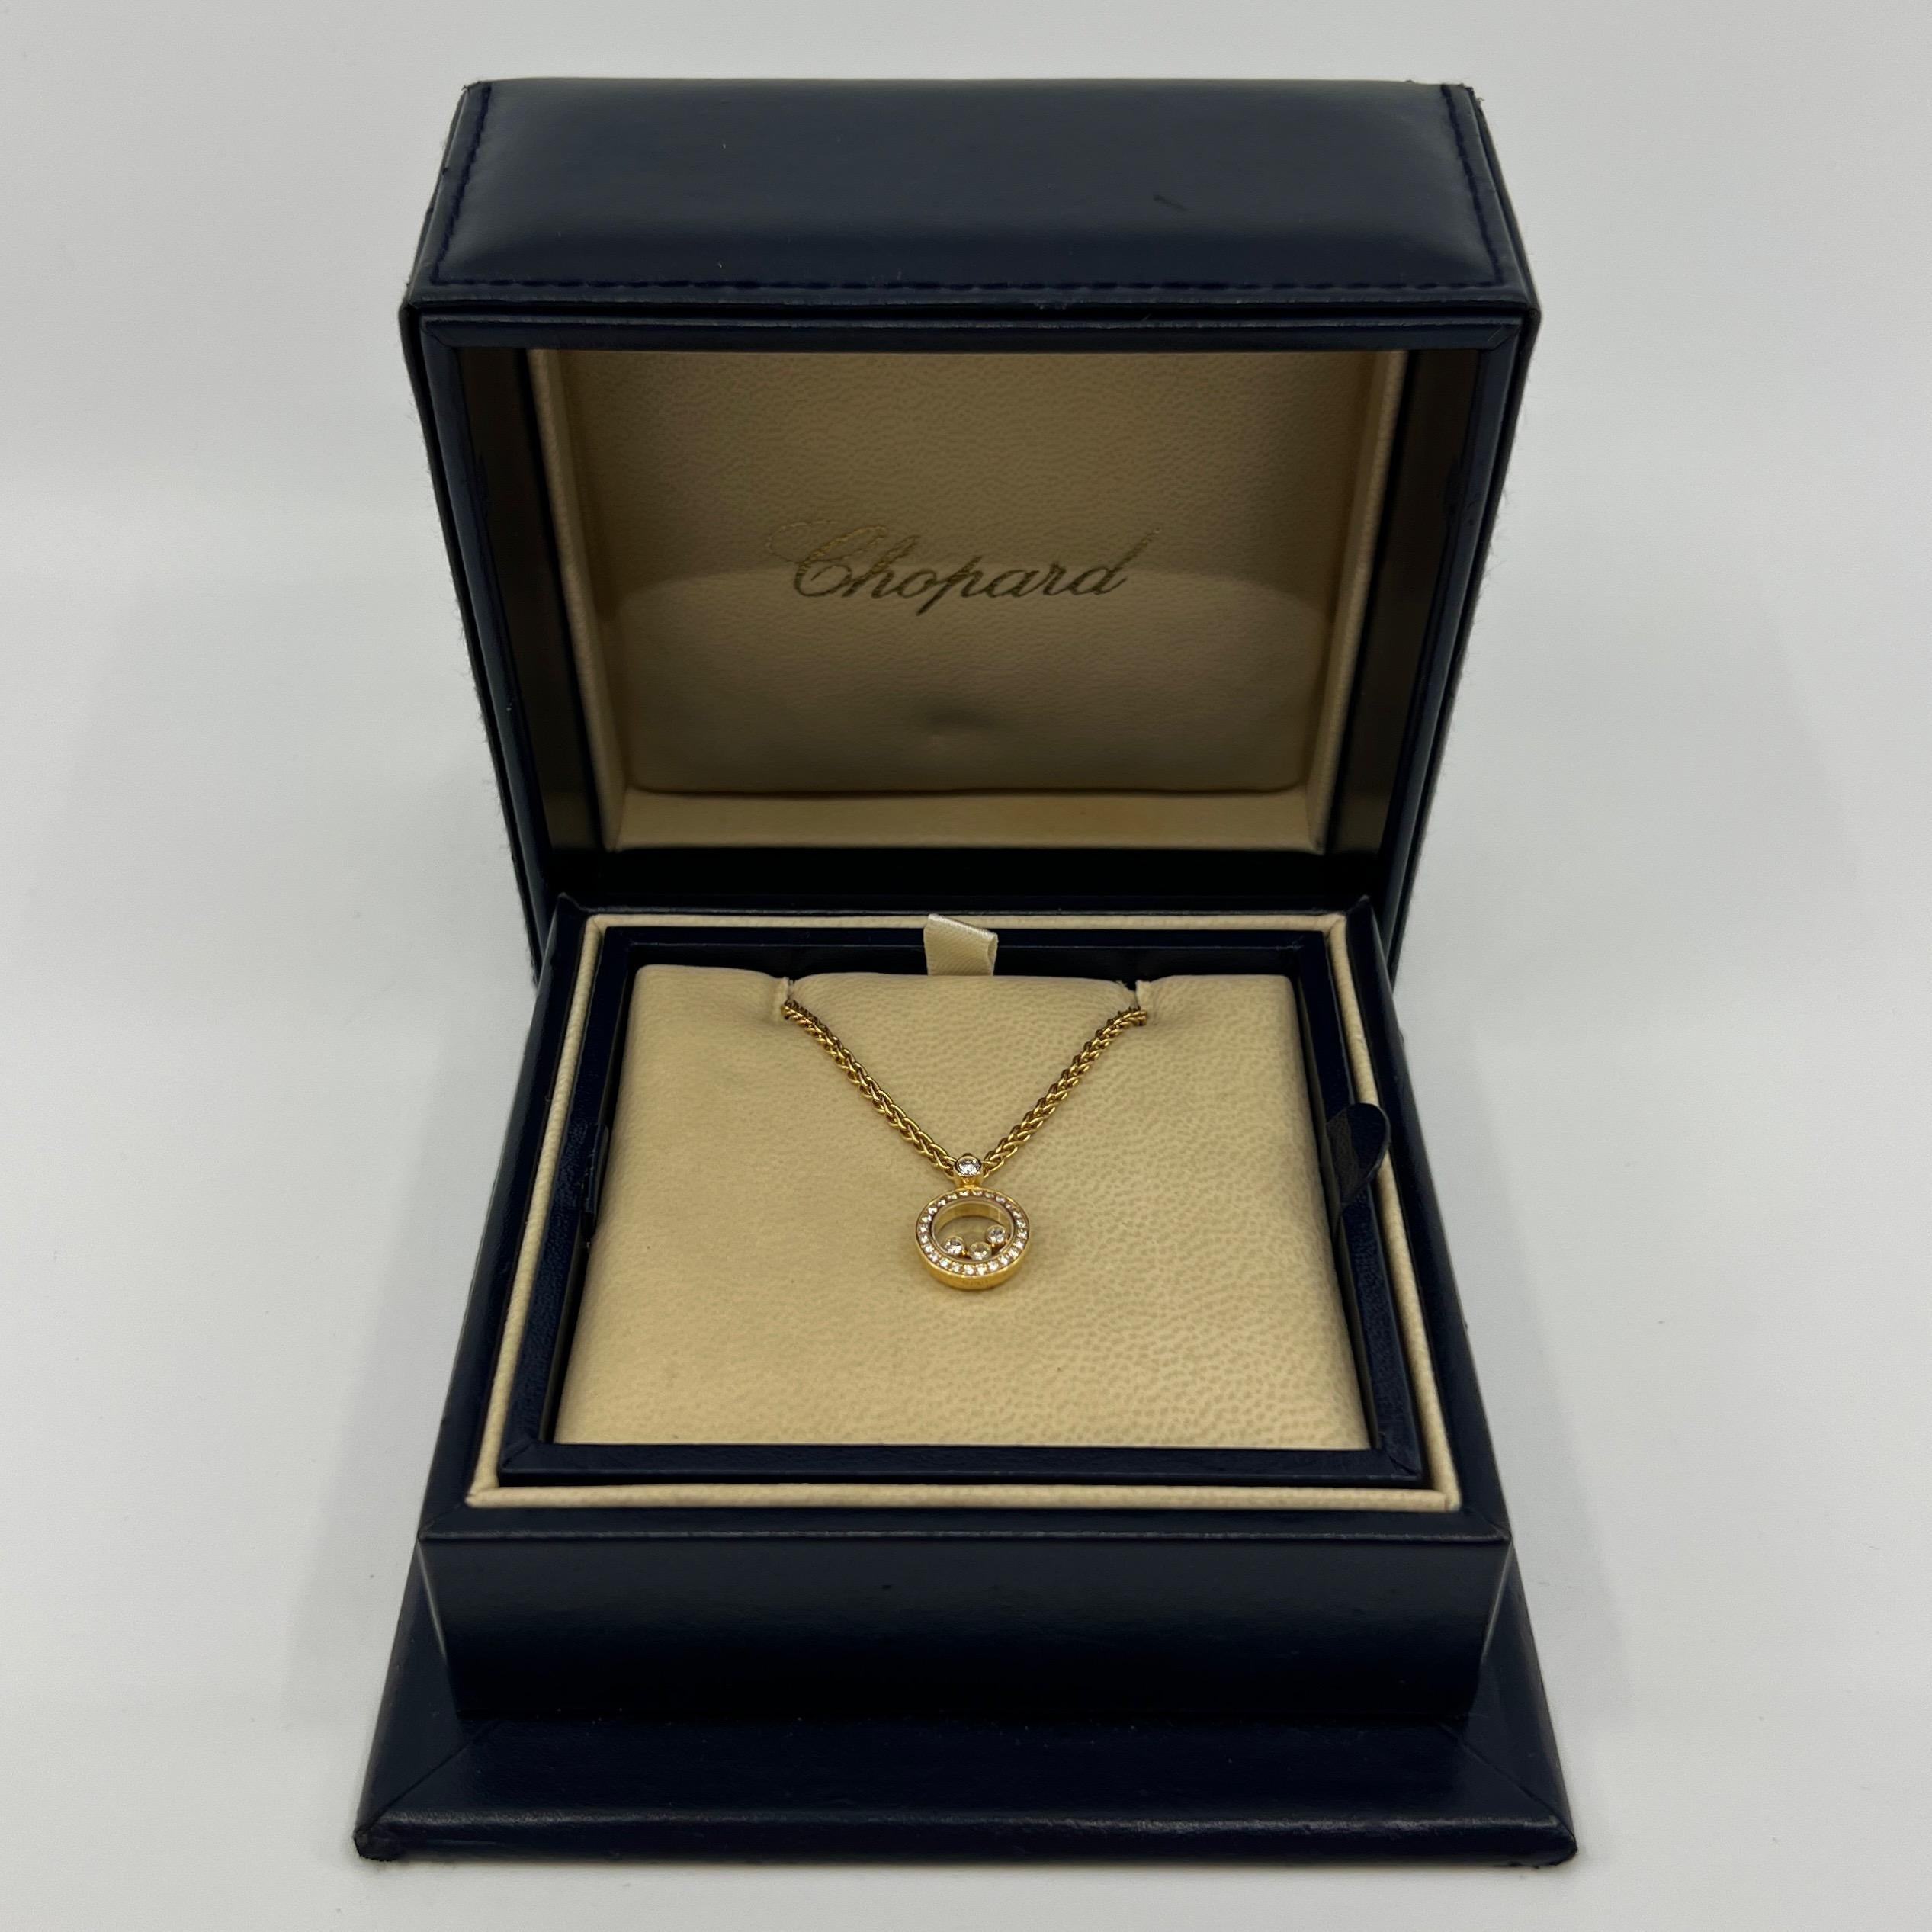 Chopard Happy Diamonds 18k Yellow Gold Oval Pendant Necklace.

Inspired by drops of water, Chopard's Happy Diamonds Icons collection features diamonds that are free to swirl gracefully behind sapphire crystal glass, enhancing their sparkle with